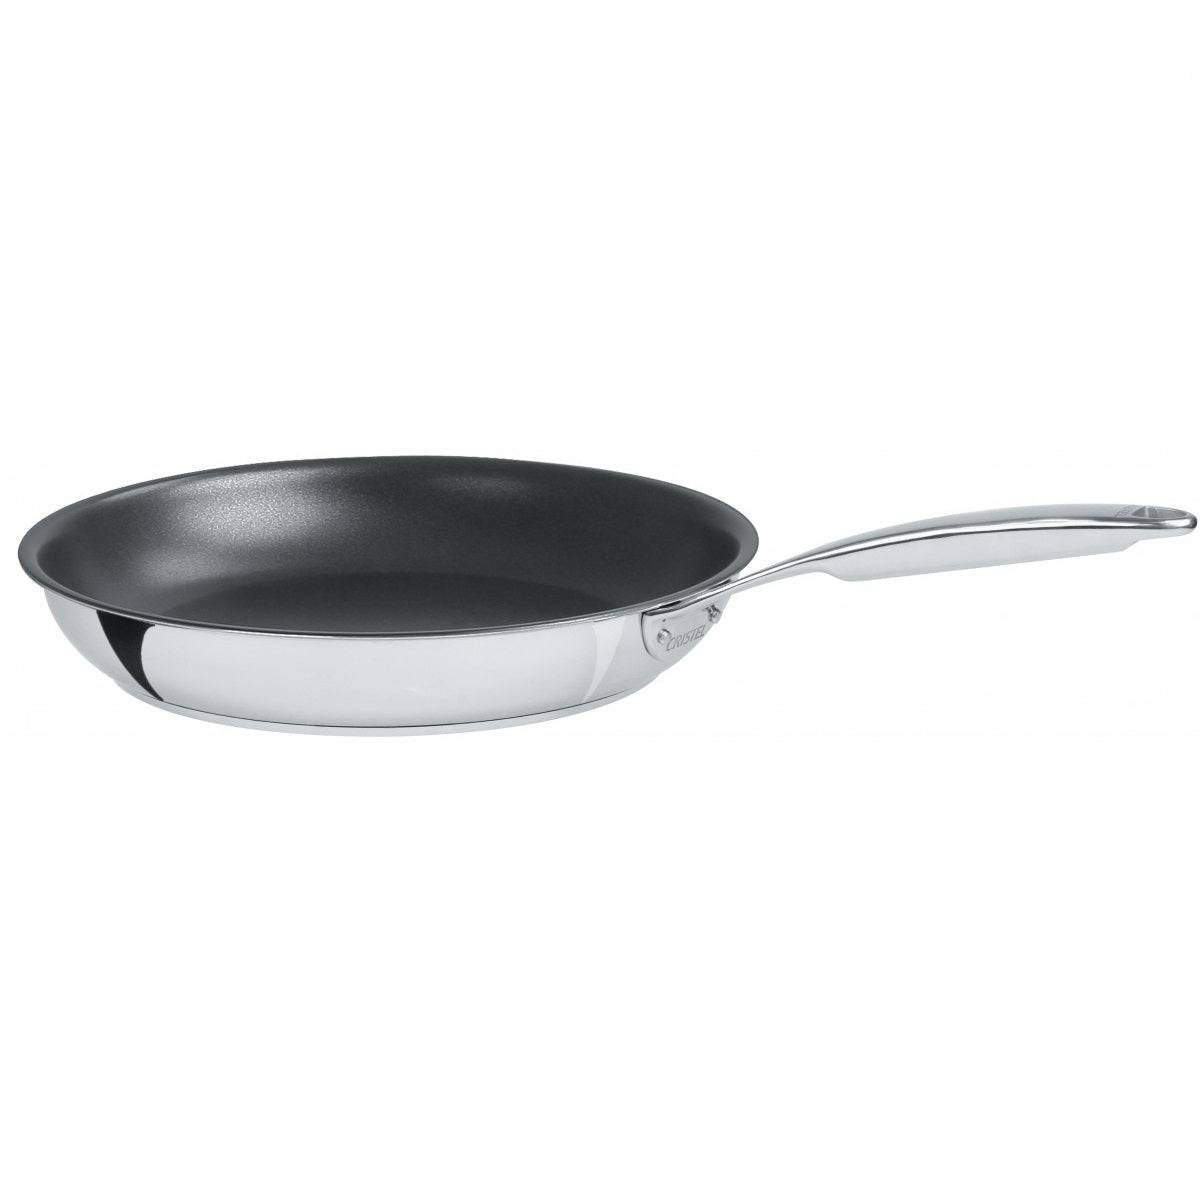 Image of ID 1379679652 Cristel Castel´Pro Multiply Stainless Steel Nonstick Frying Pan